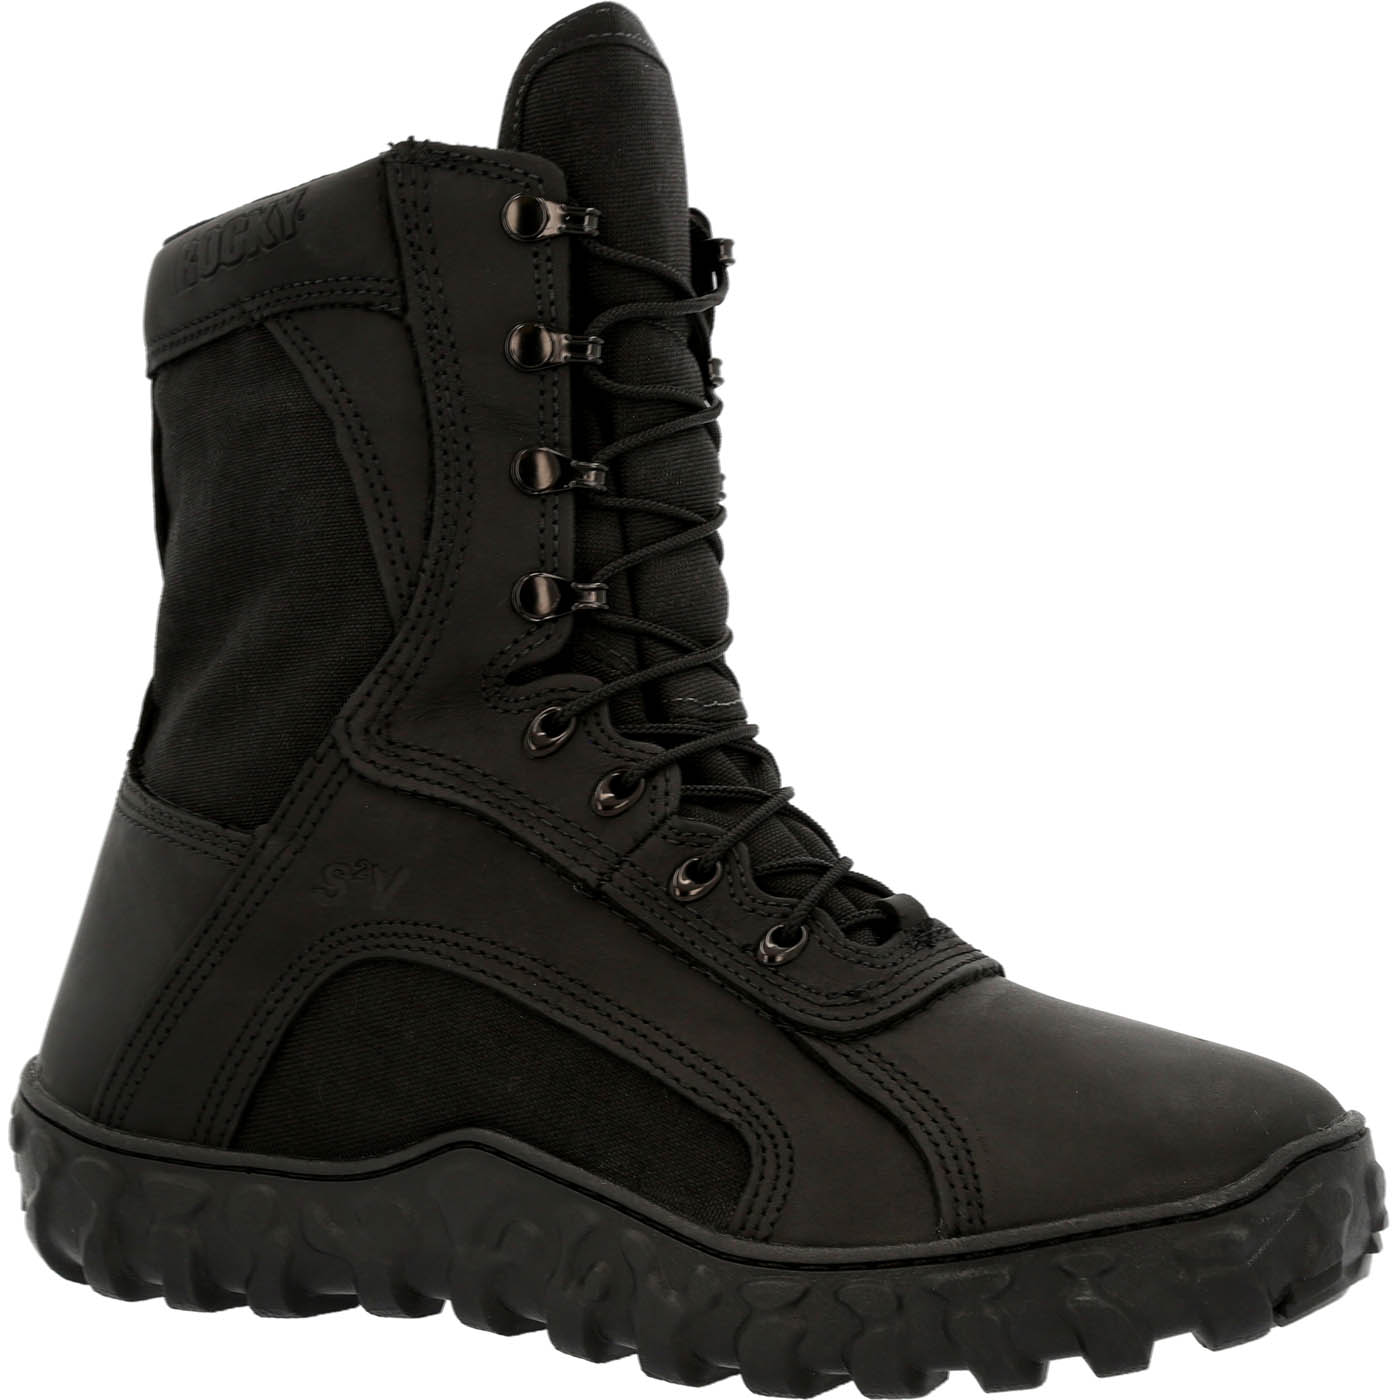 Rocky S2V: Black Waterproof Insulated Military Boot; RKC079